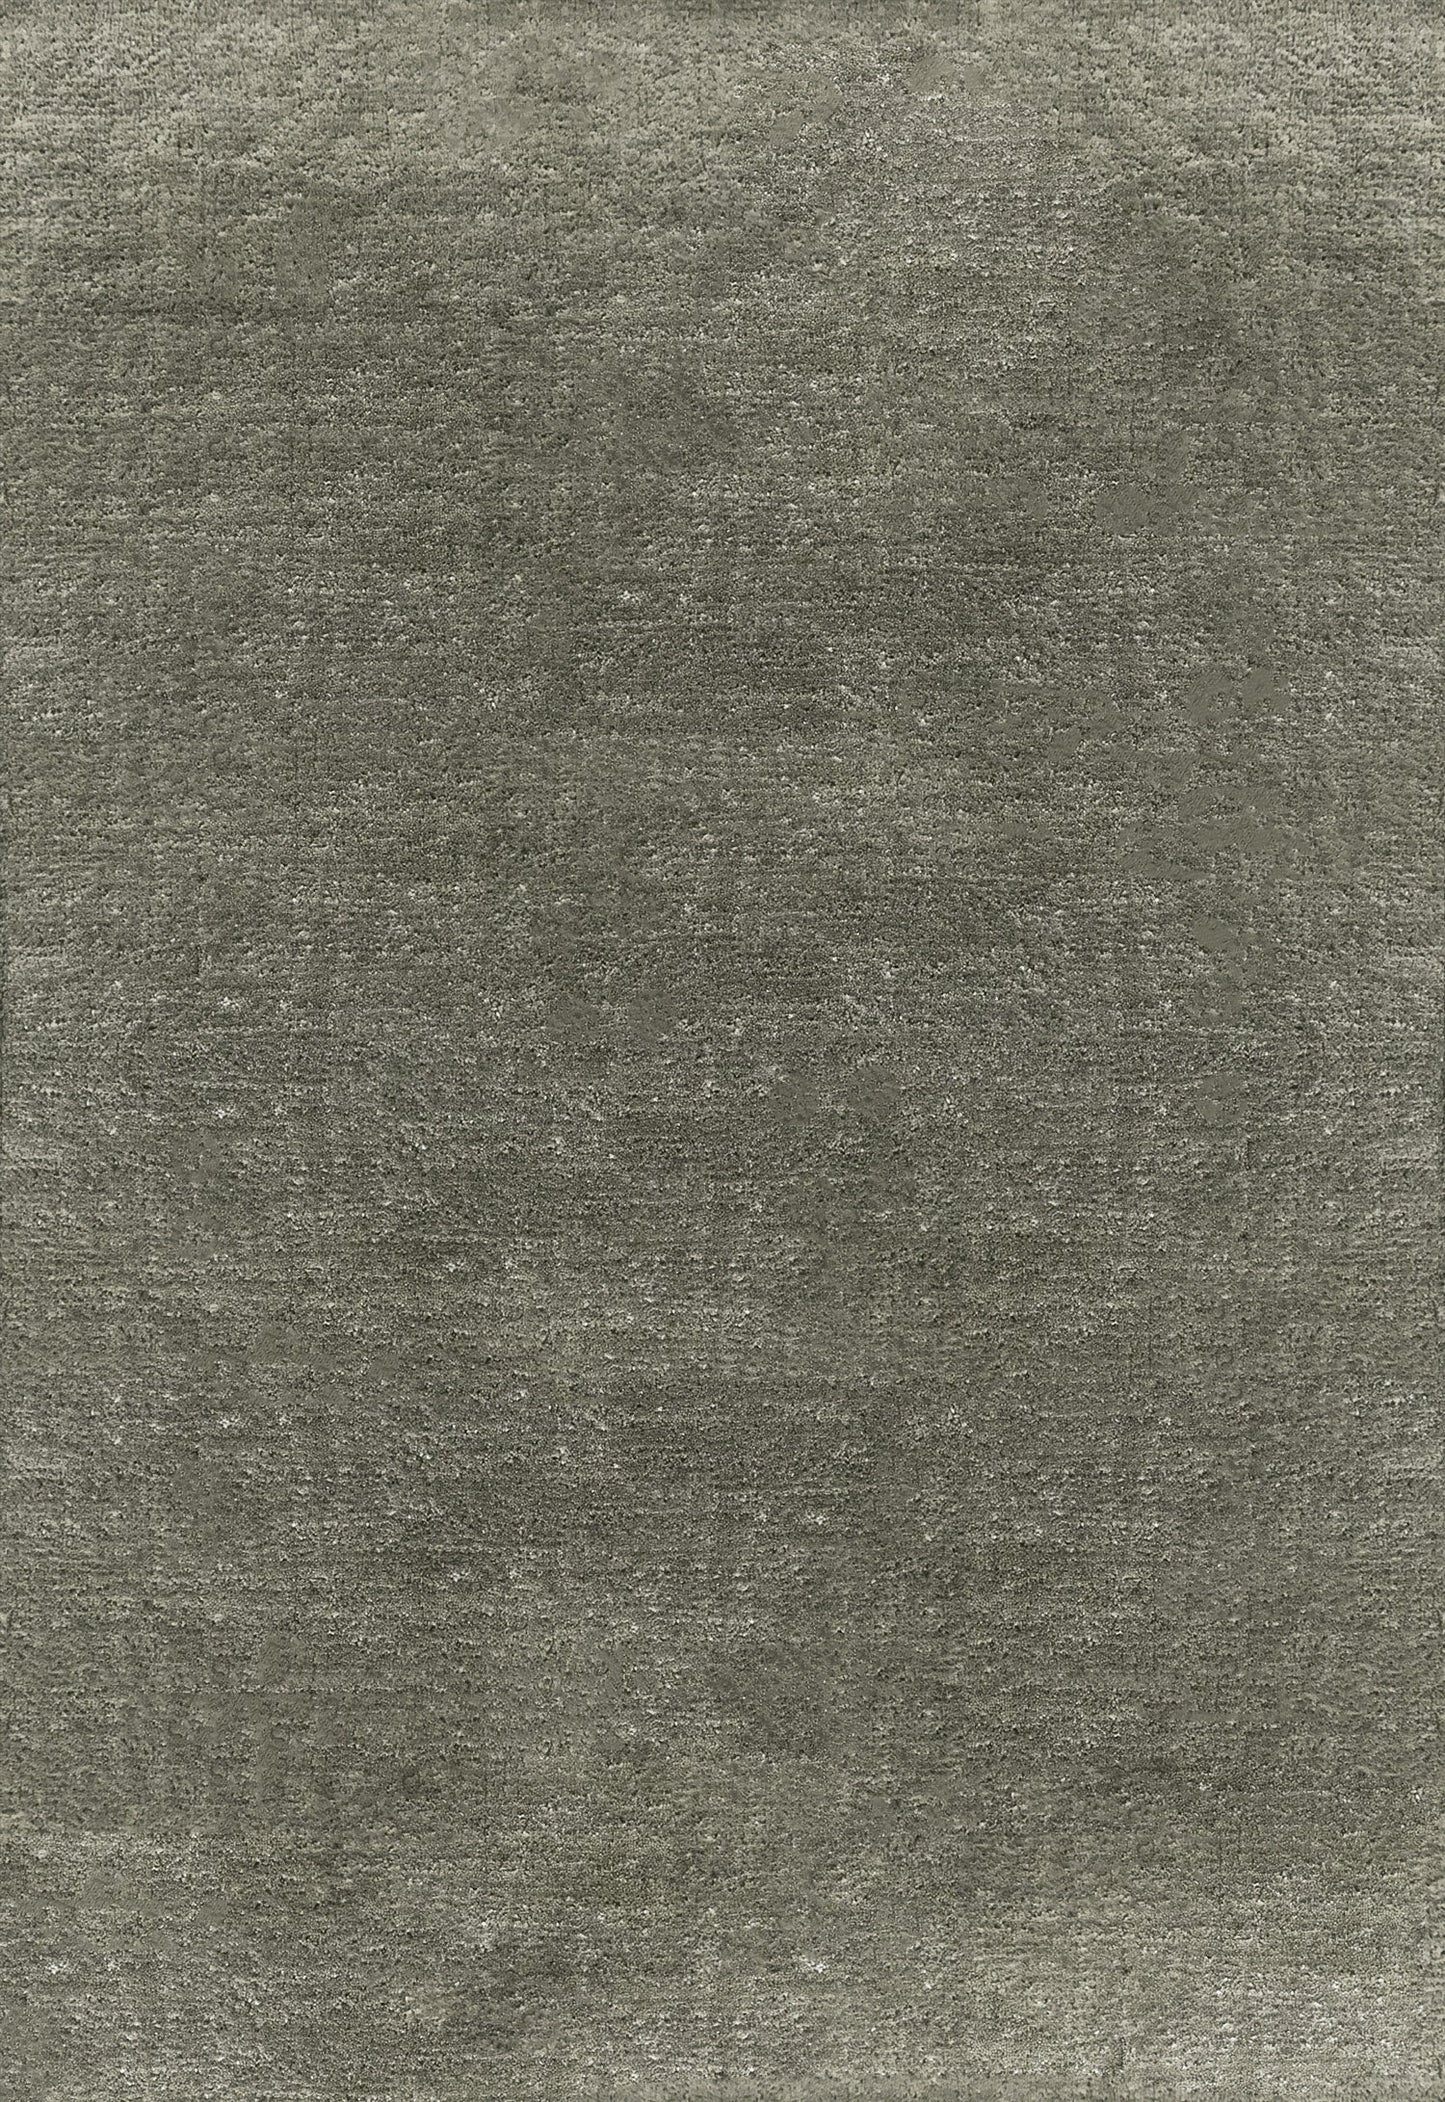 Vloerkleed Layered Solid Recycled Rug Olive